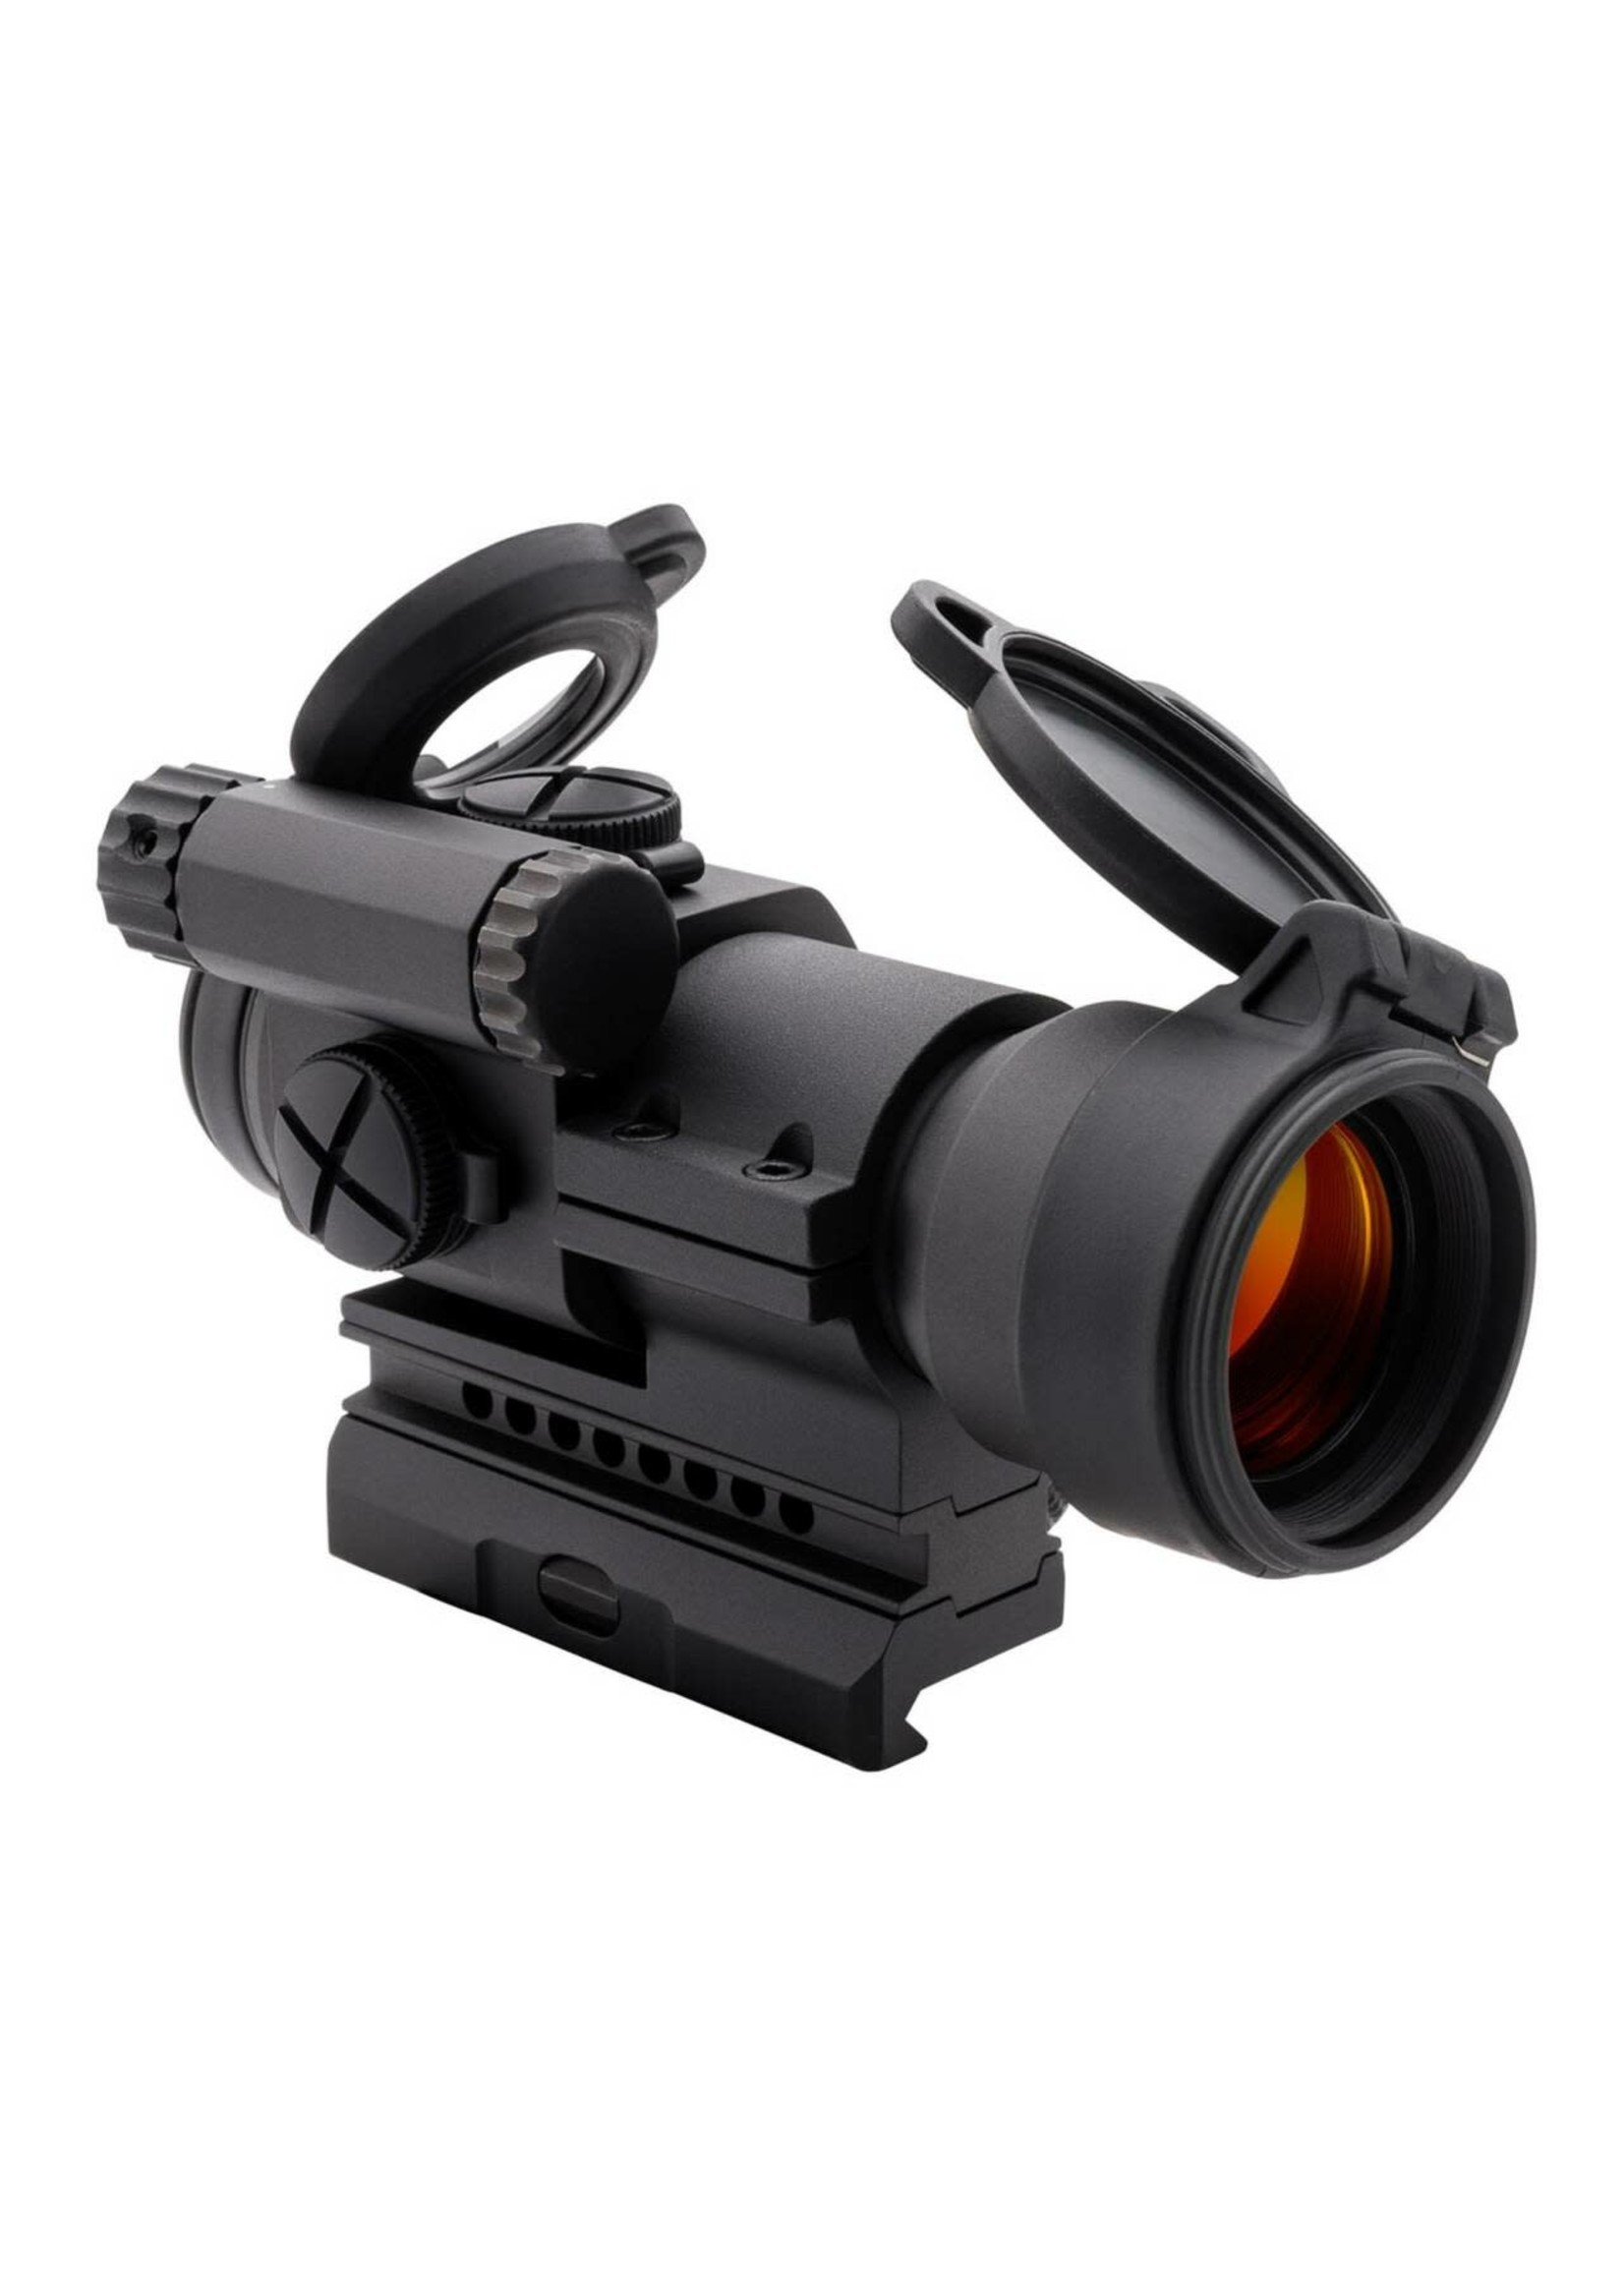 Aimpoint Aimpoint Patrol Rifle Optic (PRO™) Red Dot Reflex Sight - QRP2 Mount